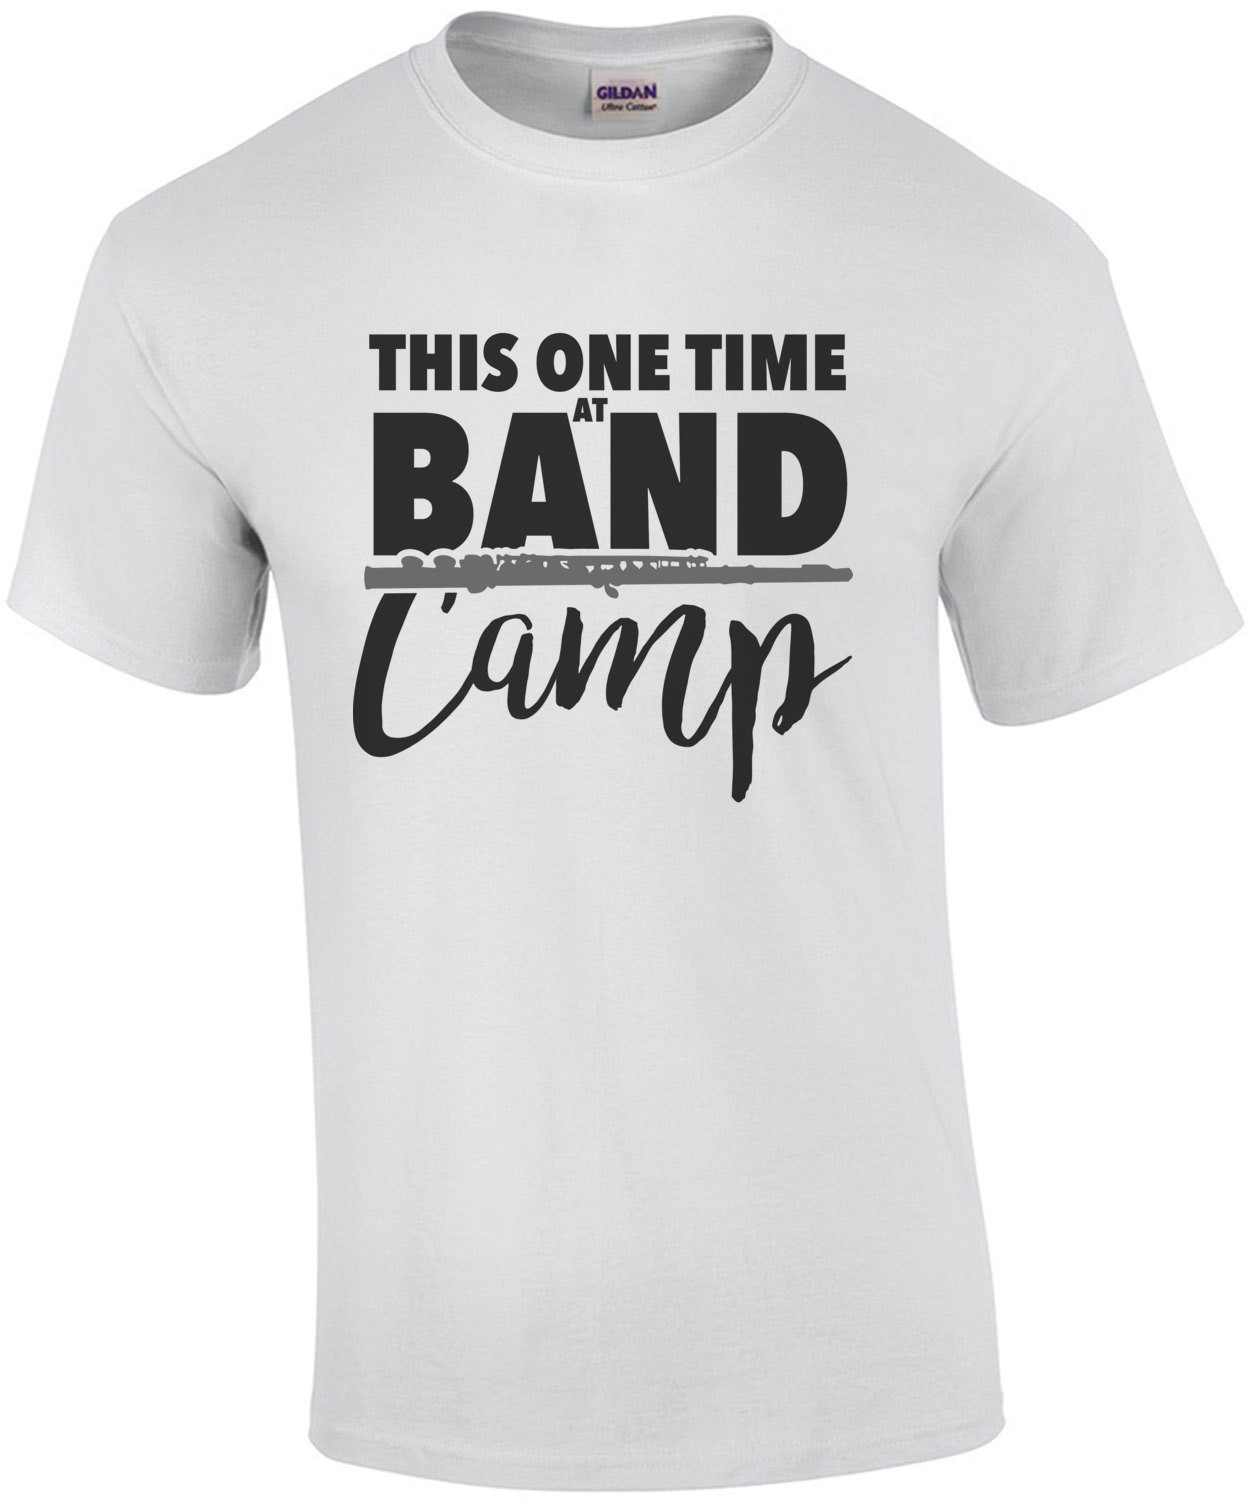 This one time at band camp - American Pie - 90's T-Shirt